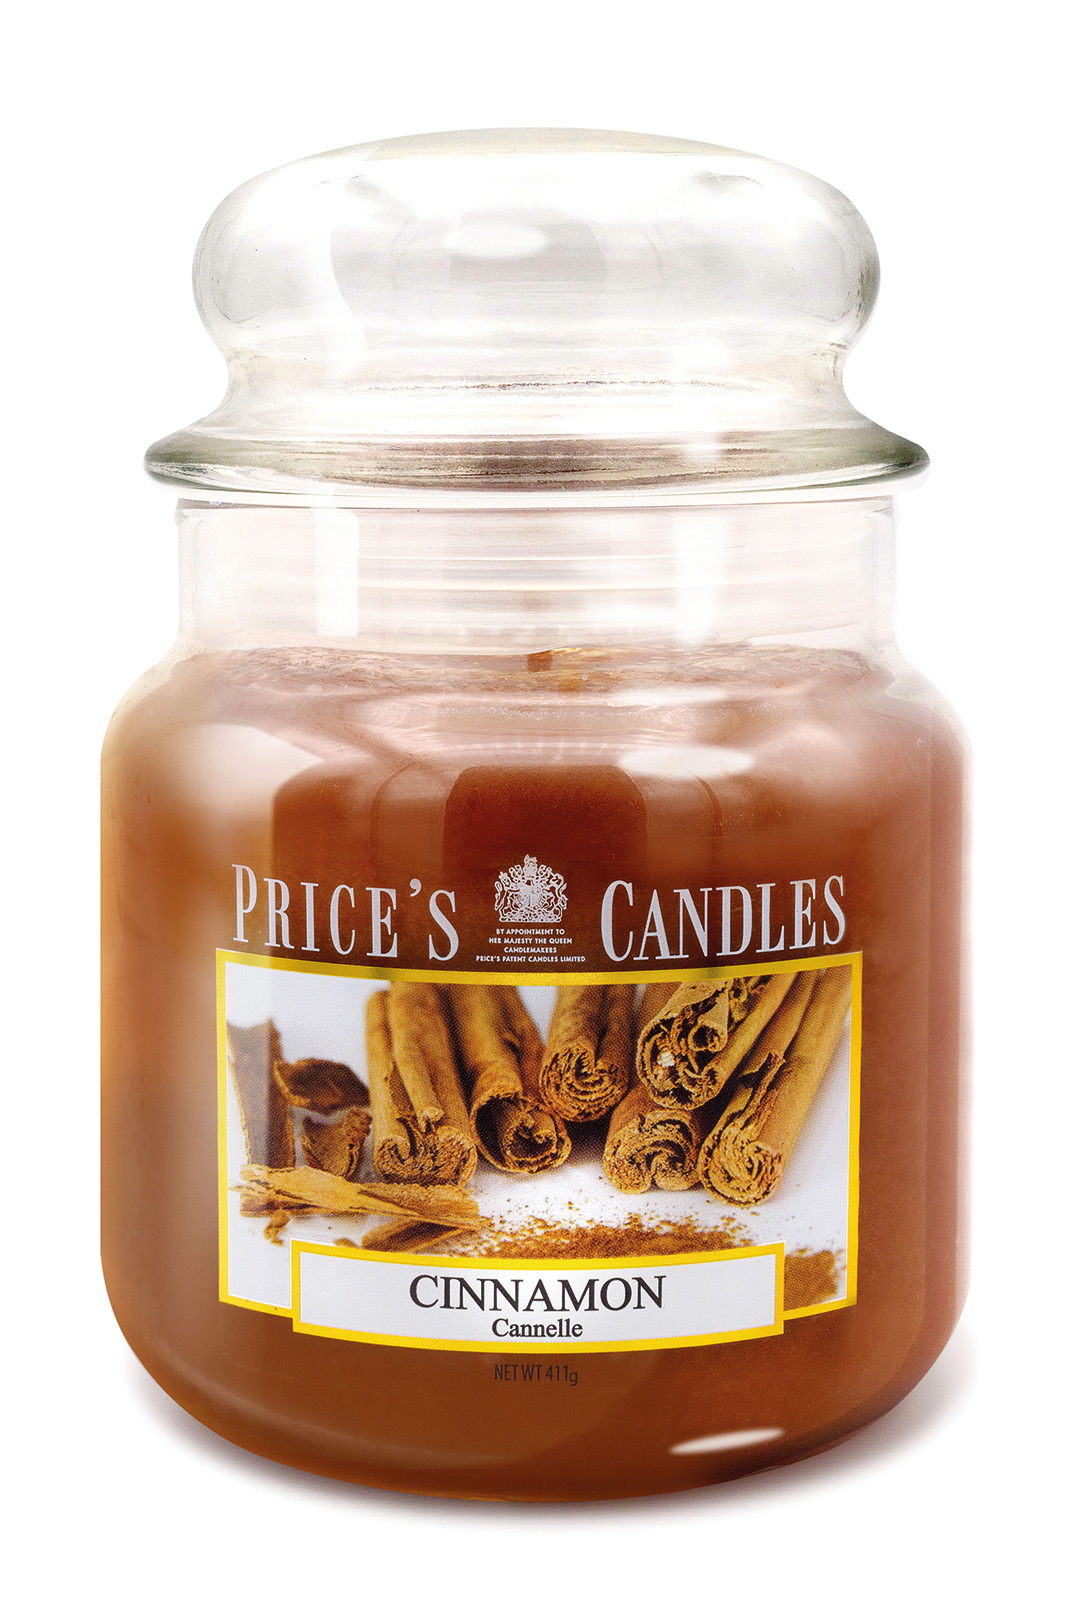 Prices Candle "Cinnamon" 411g  